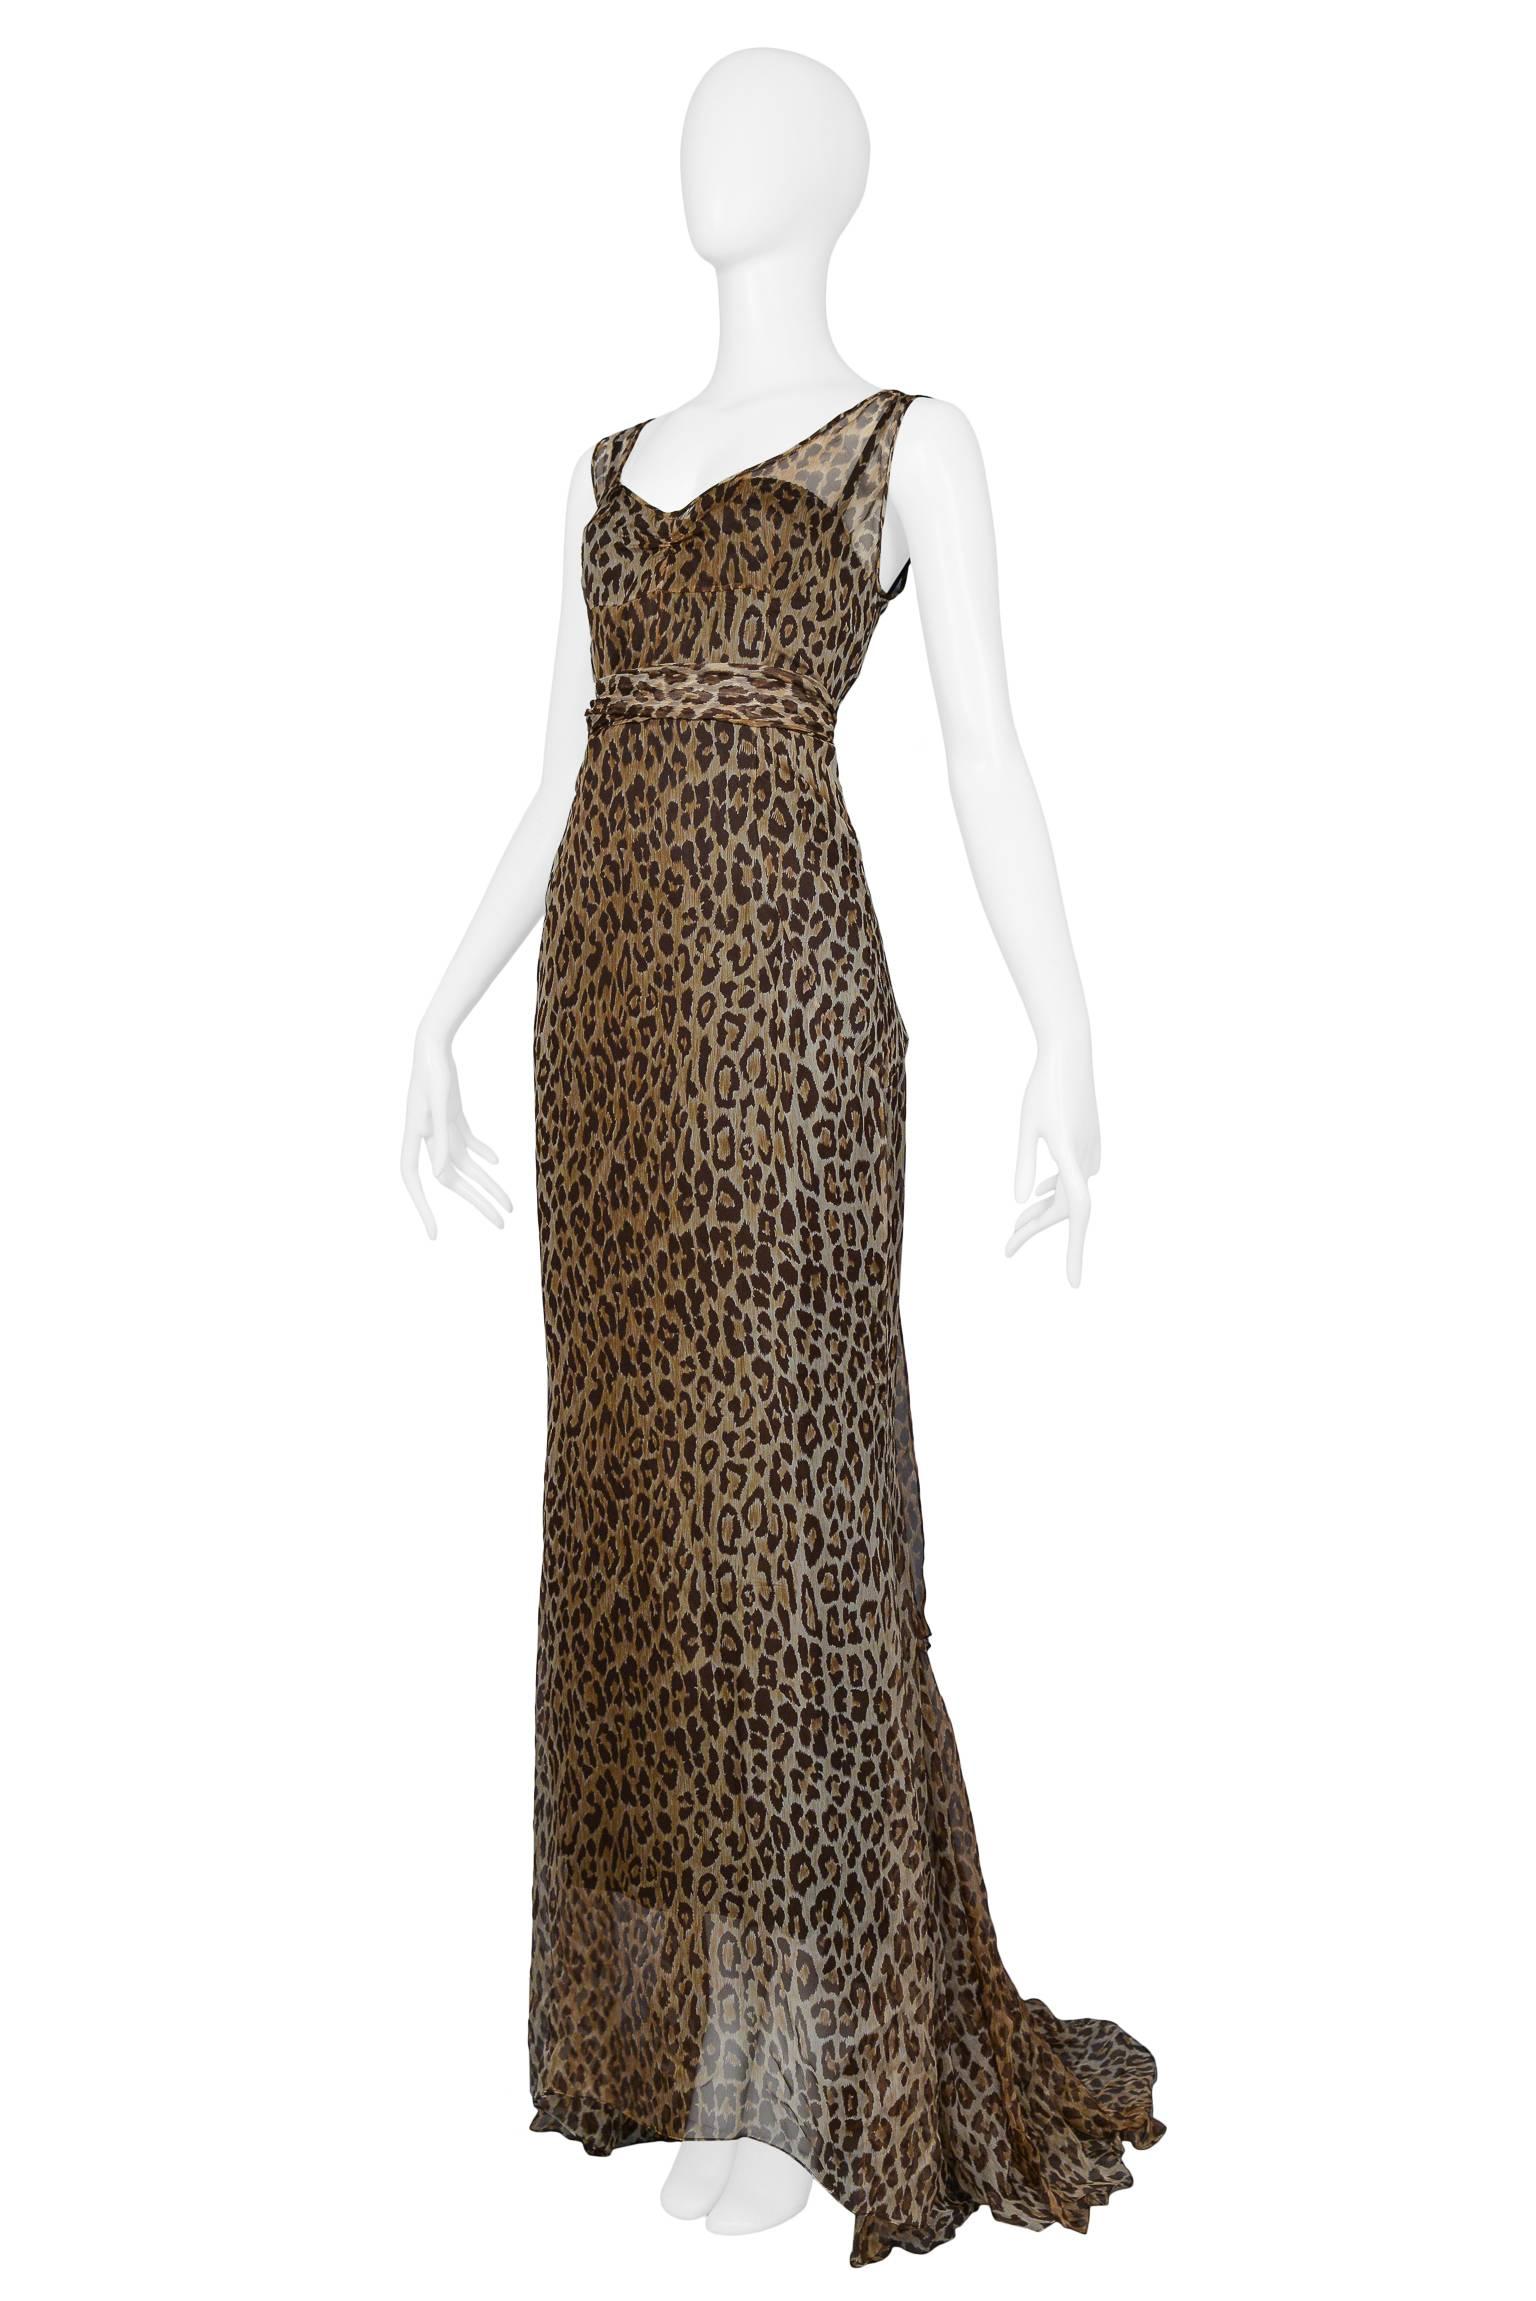 Dolce & Gabbana chiffon leopard print statement evening gown with attached under slip dress and matching sash. The dress features an open neckline, exposed upper back, full length front hem and extra long train at back. 